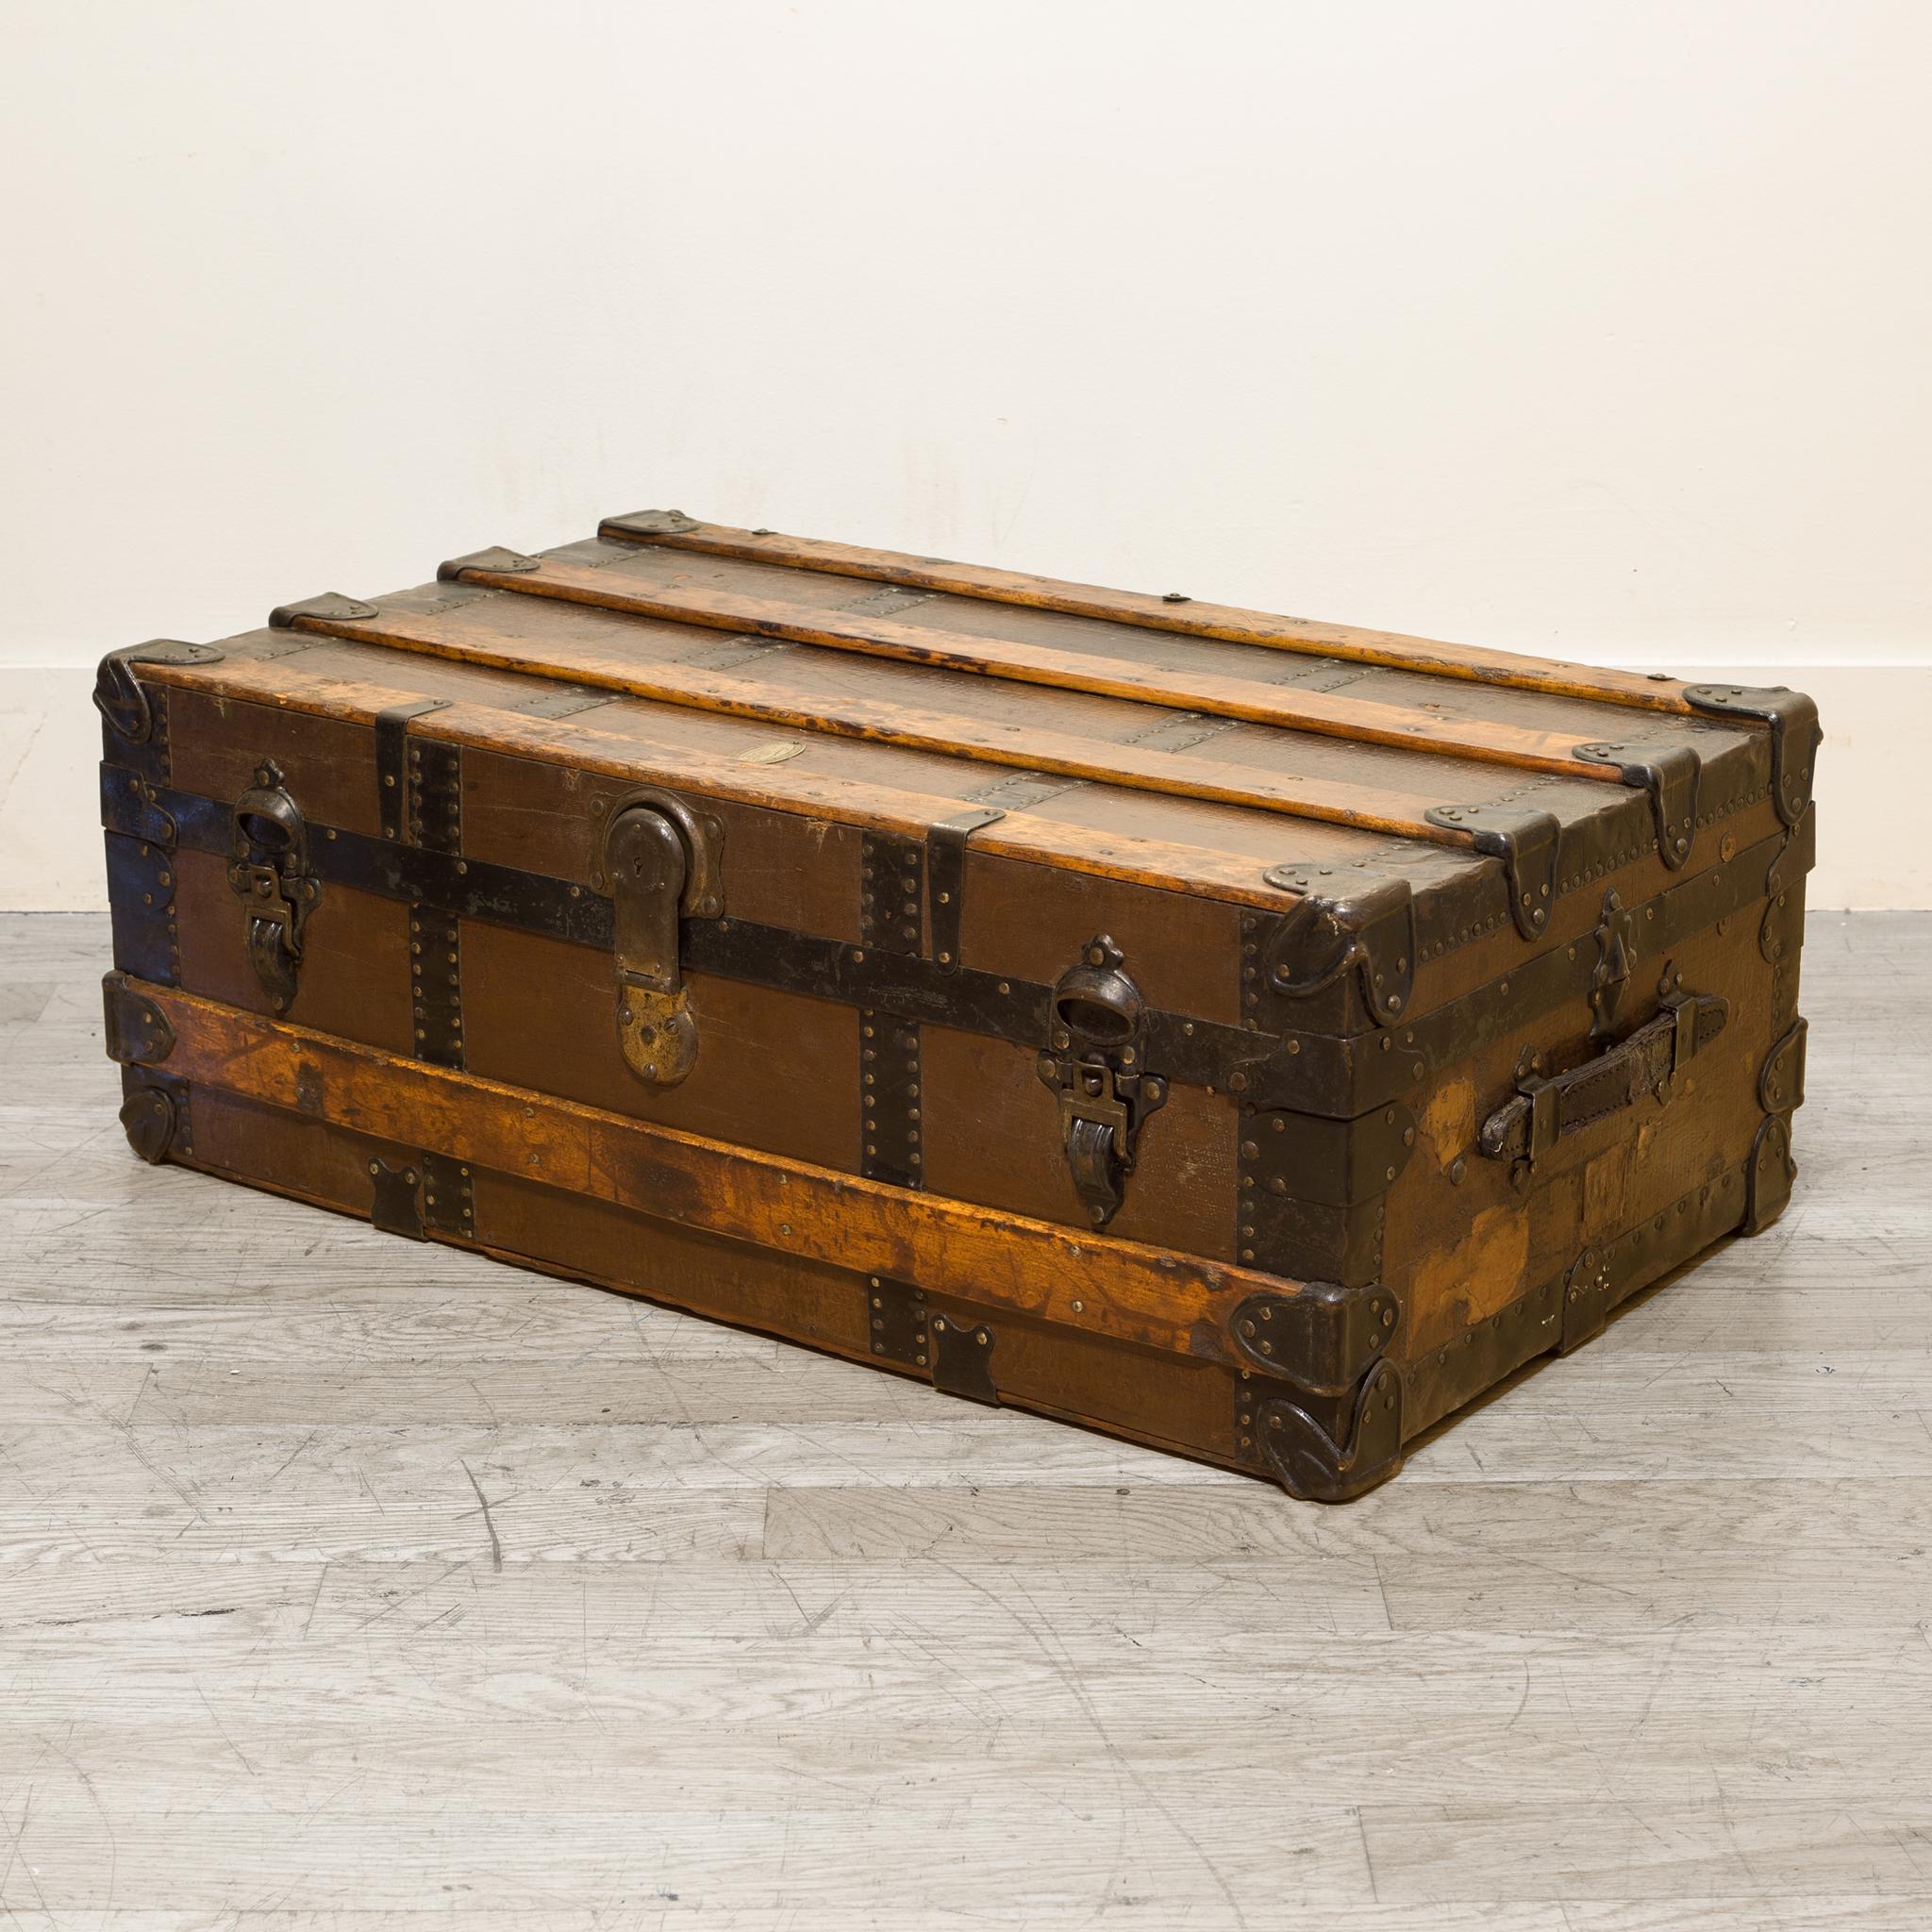 About

An antique wood and steel cabin trunk with metal locks, leather handles and the original brass label by L. Goldsmith and Son Company. This piece has been finished in an oil and wax finish and is in good condition with appropriate patina for